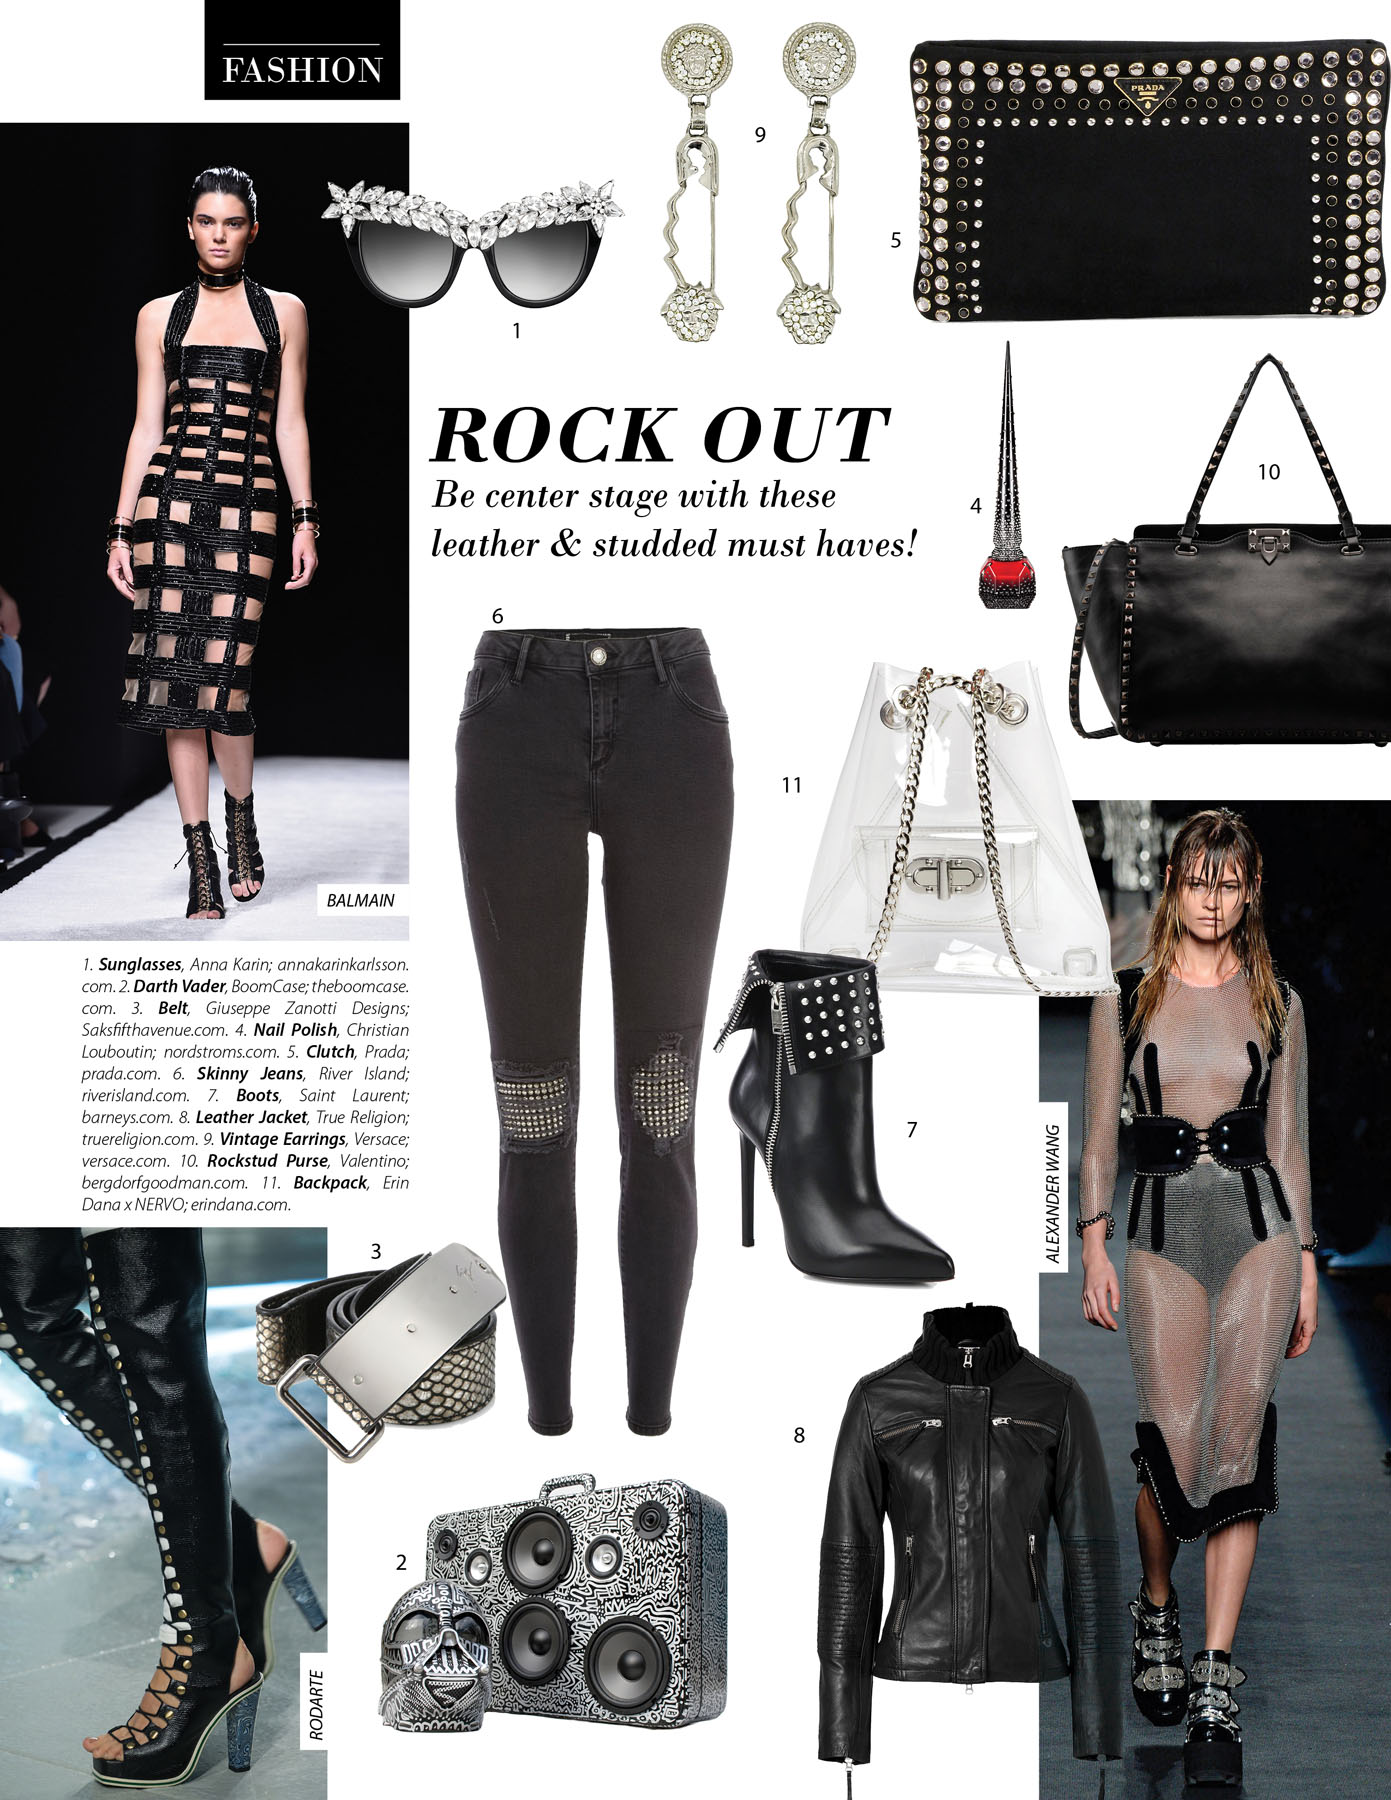 Fashion Guide for rocking out with your outfit